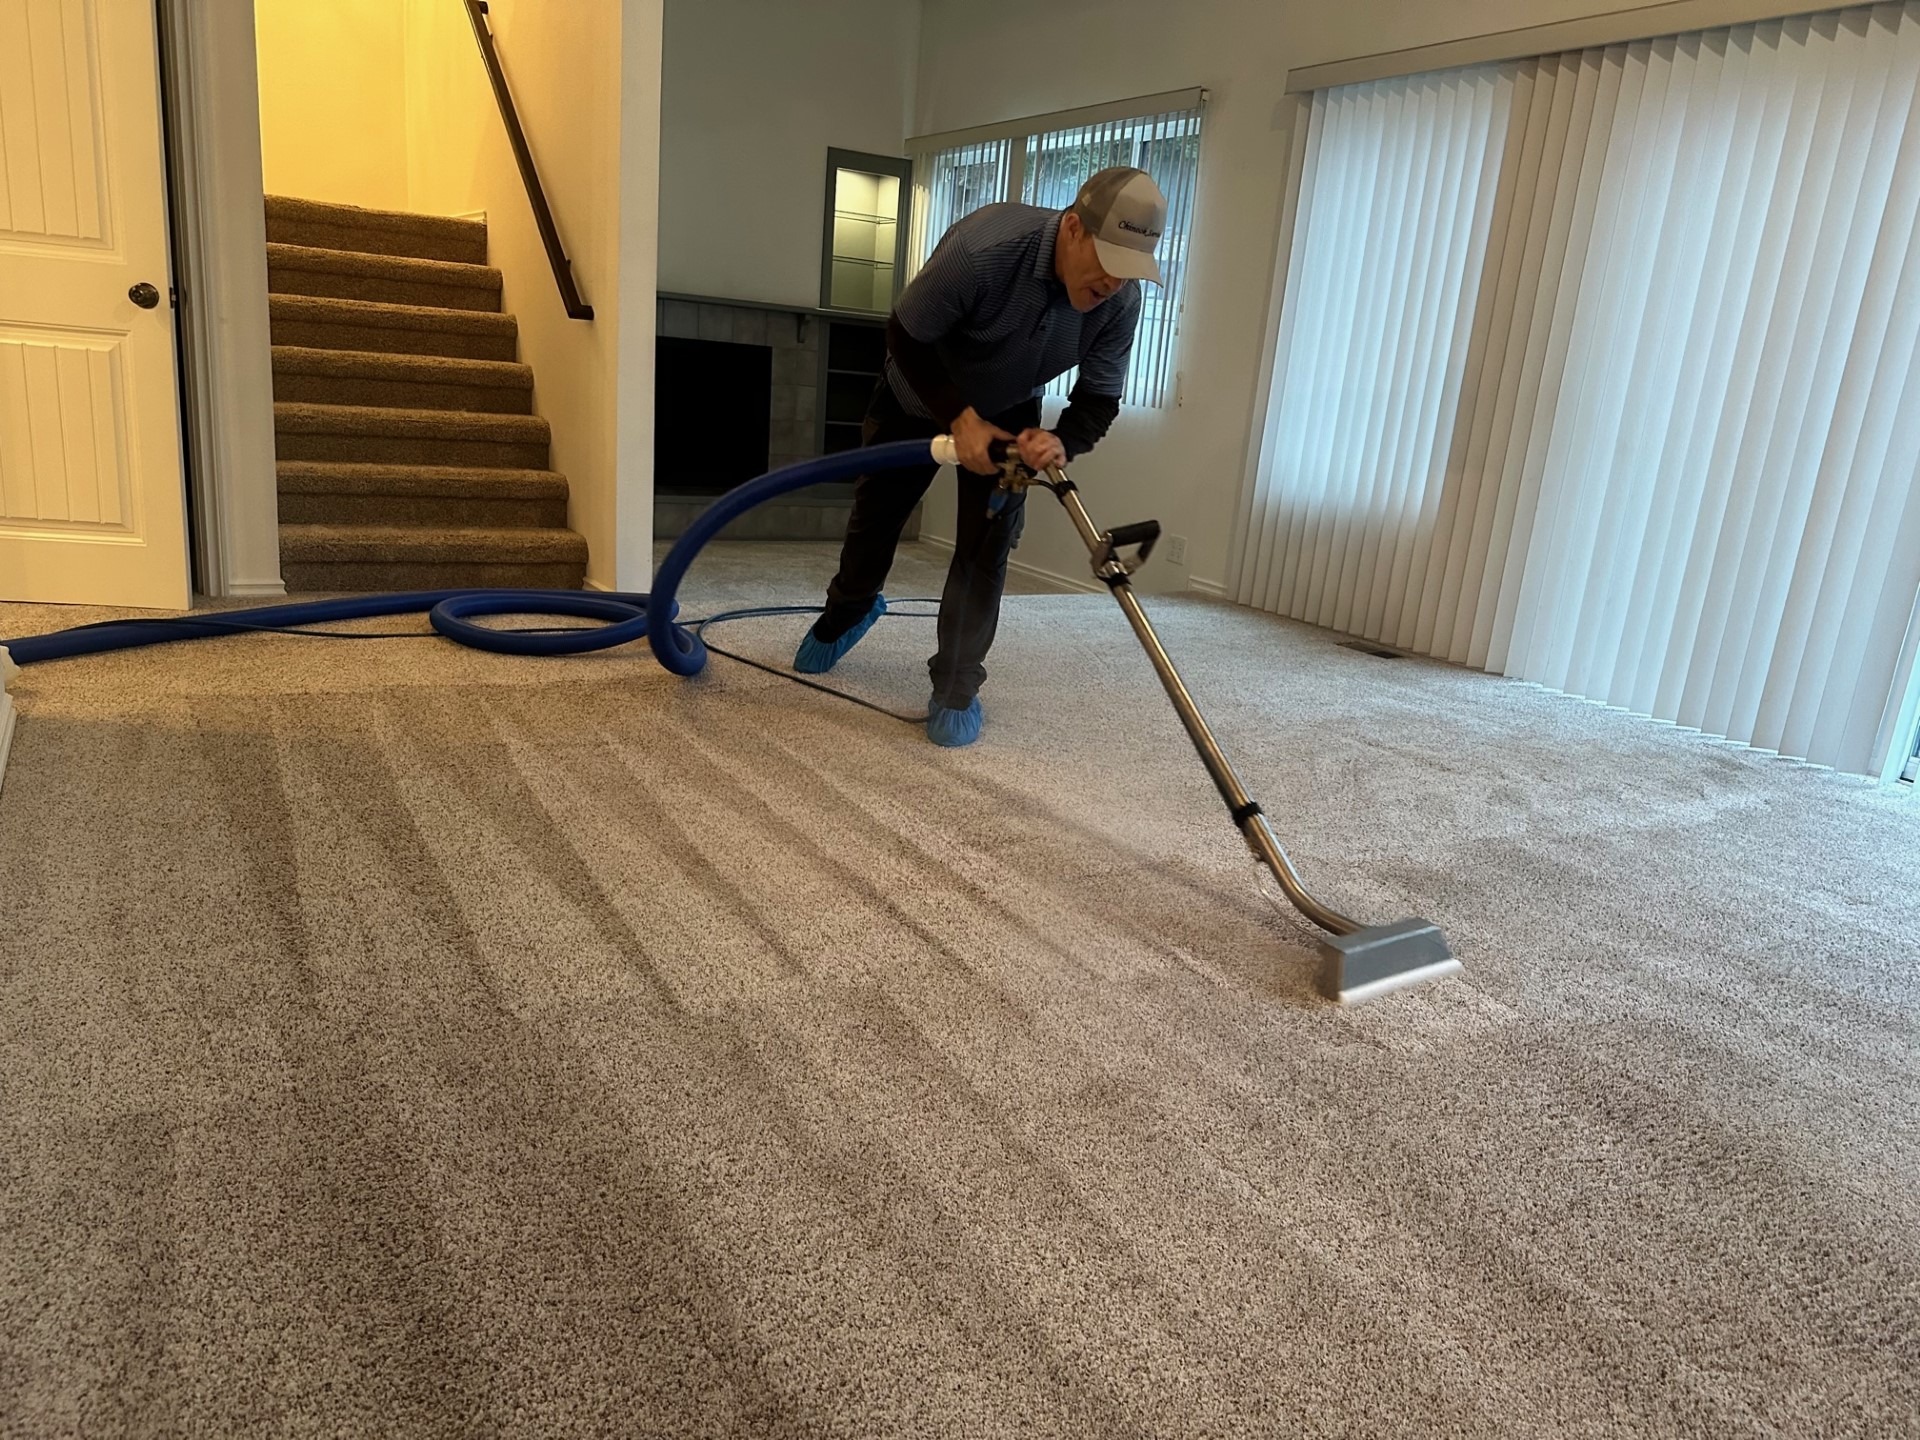 carpet cleaning by Chinook Services. Worker is cleaning carpets with truckmounted machine and wand on a local Seattle area home. The worker you can see is making the carpet look new.